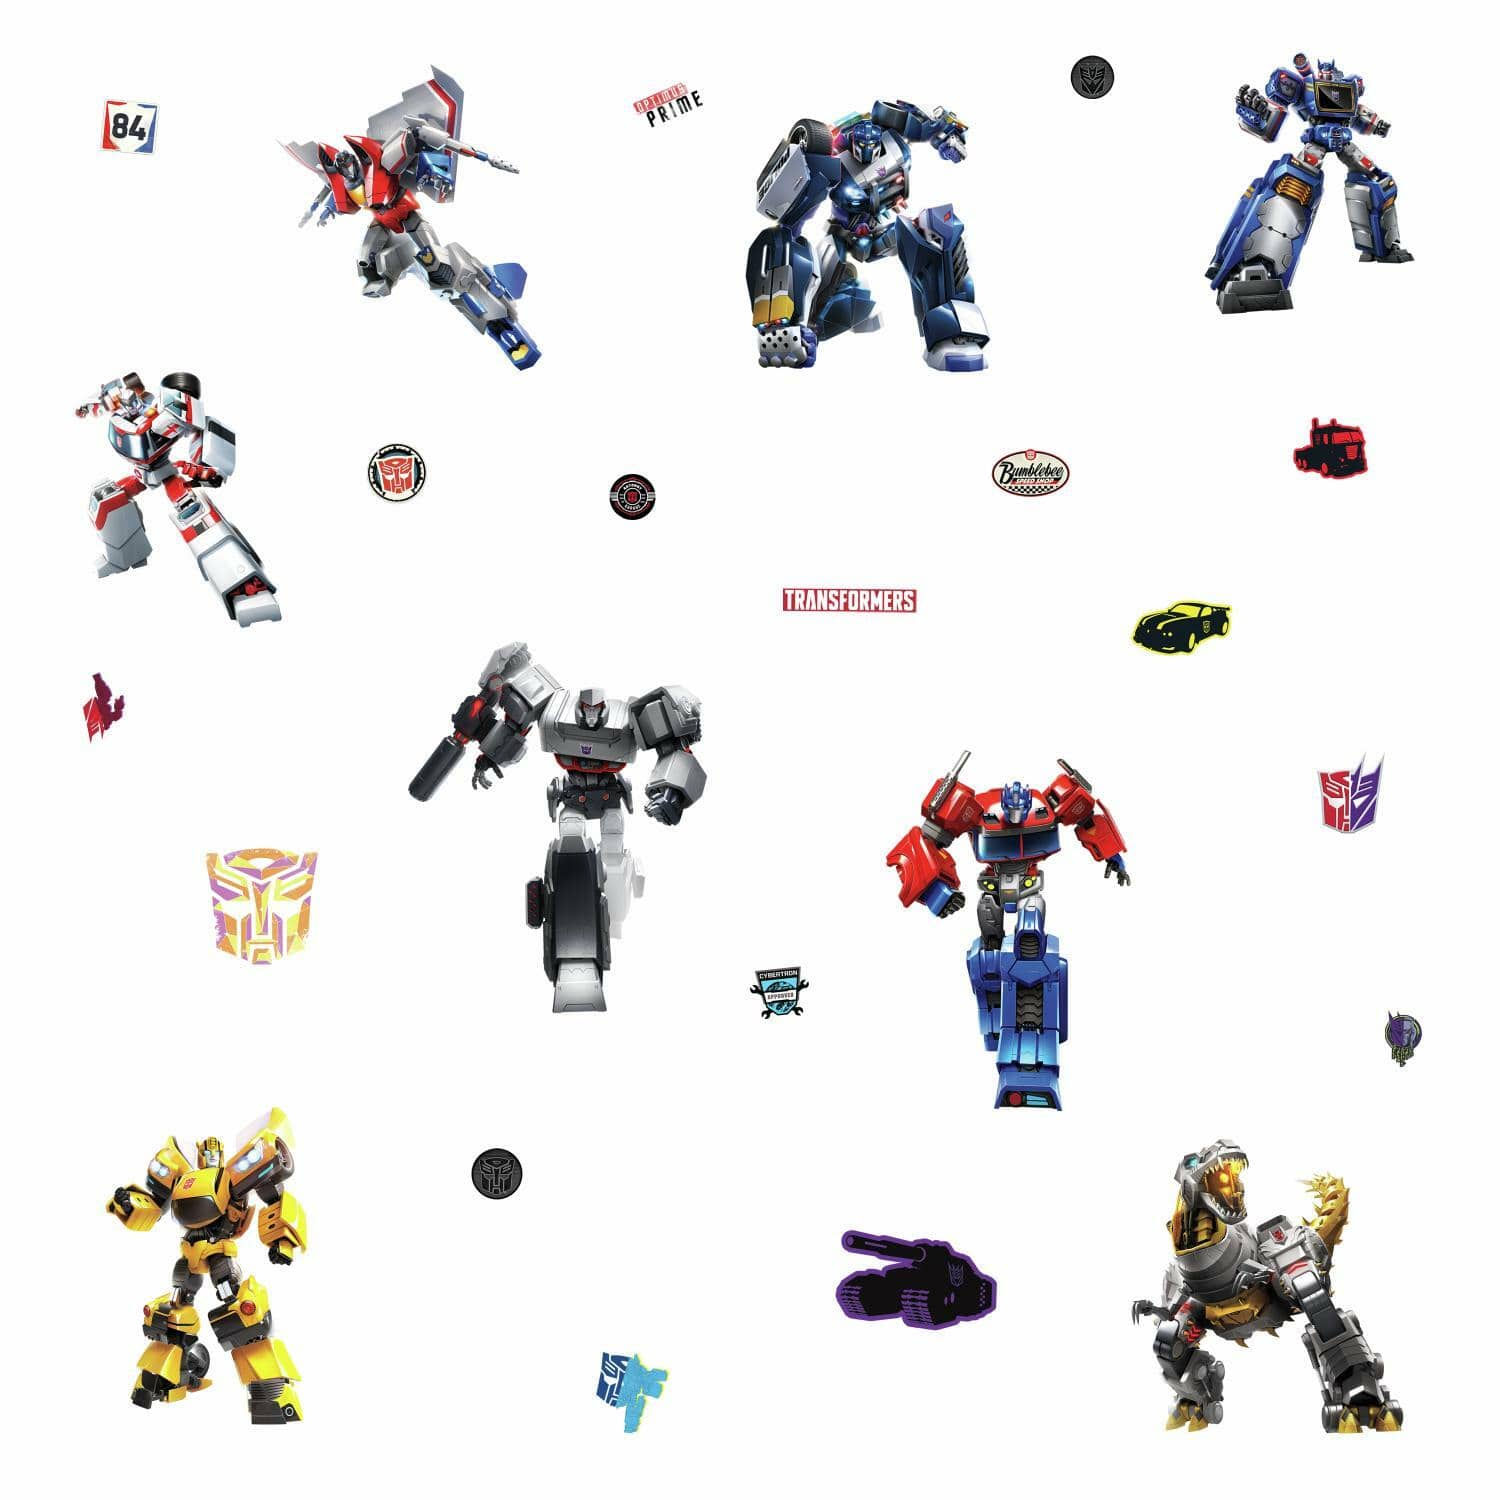 Transformers Sticker Sheet with 150 Stickers 